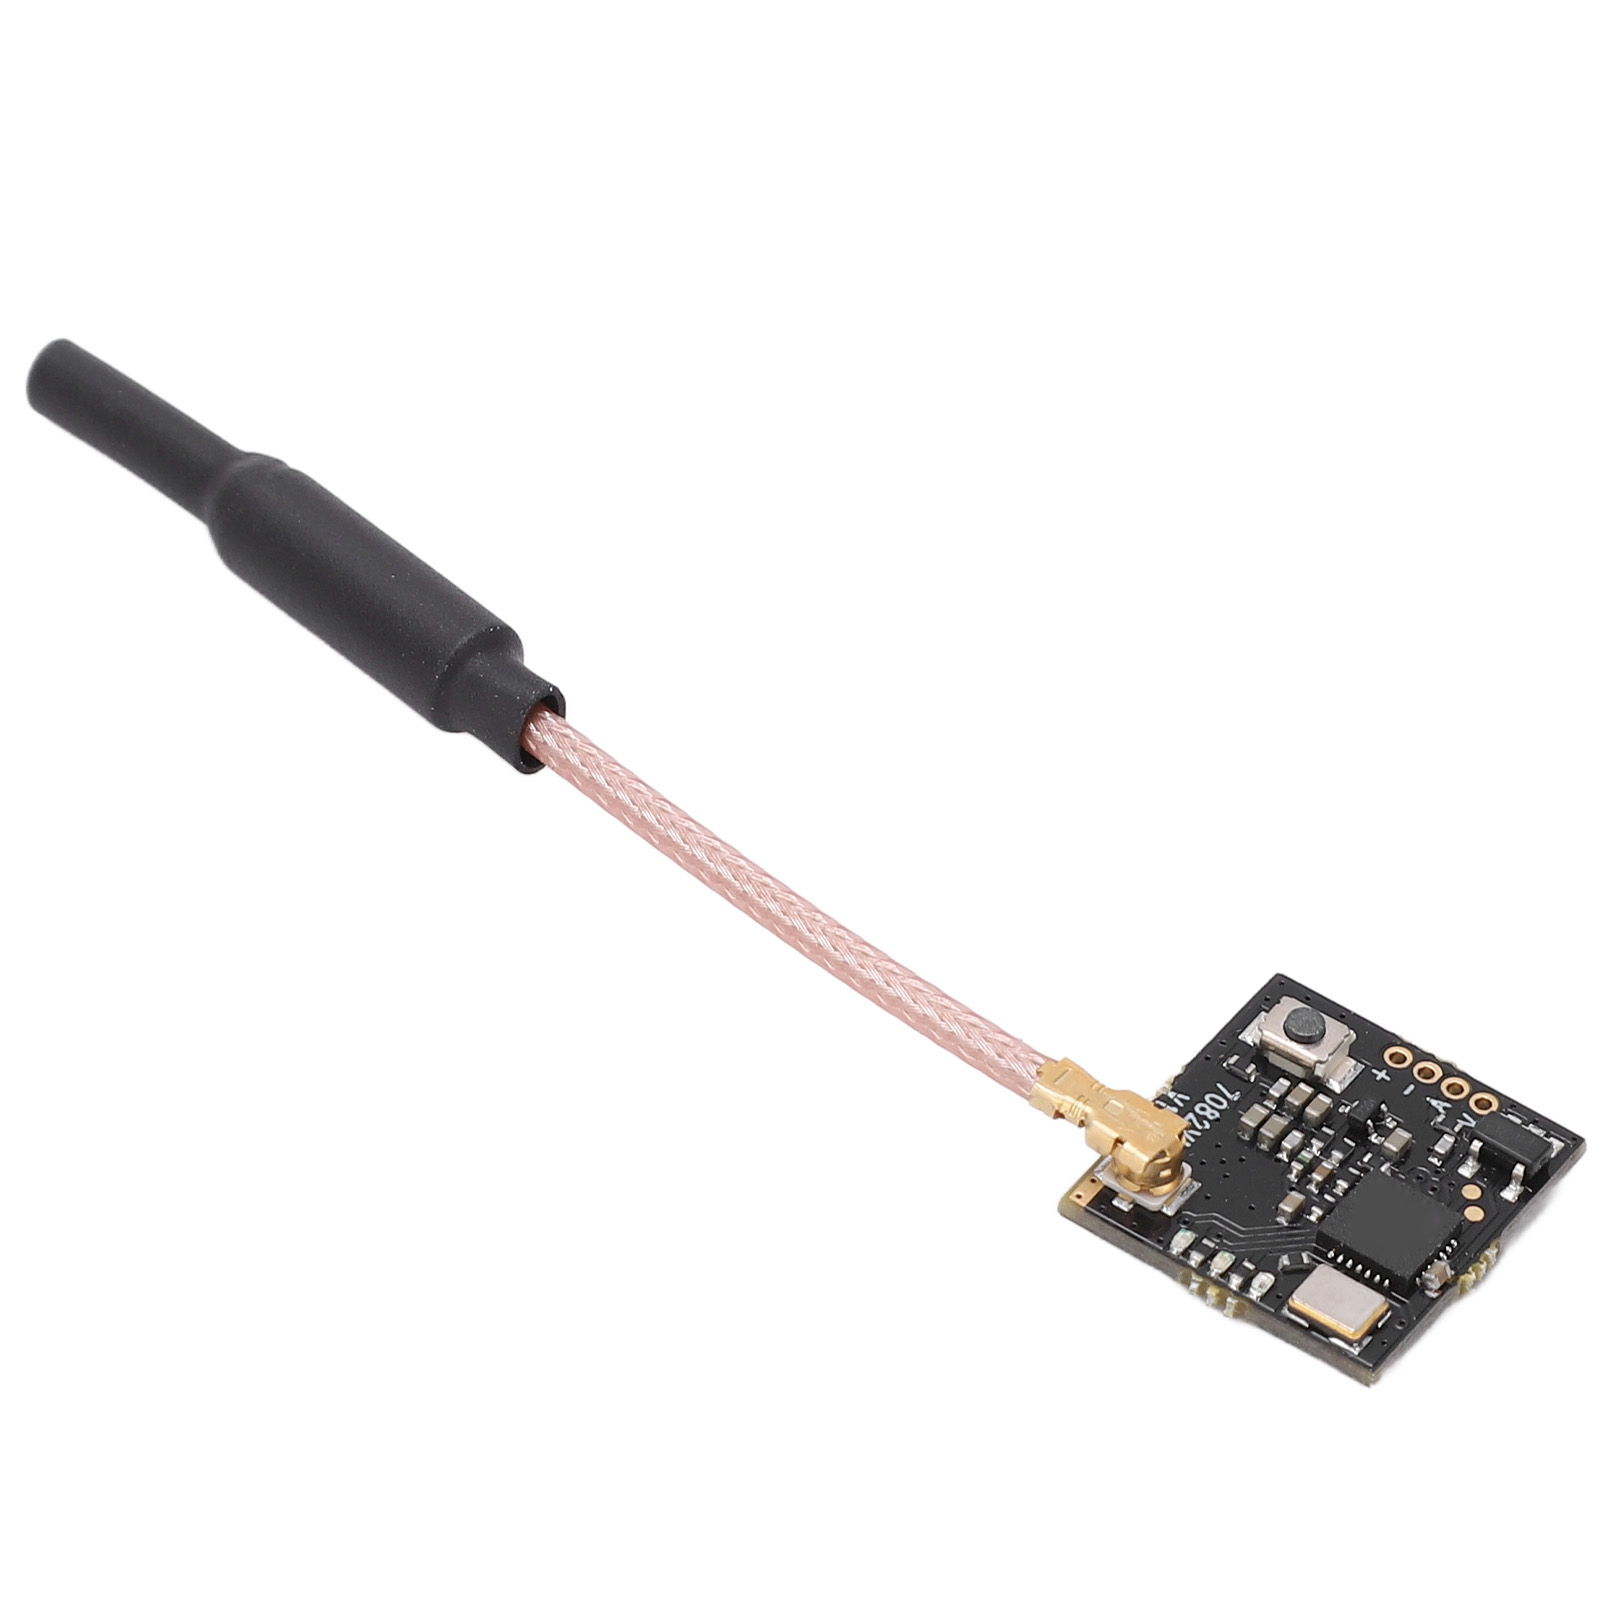 Convenient FPV Transmitter for Home and Outdoor